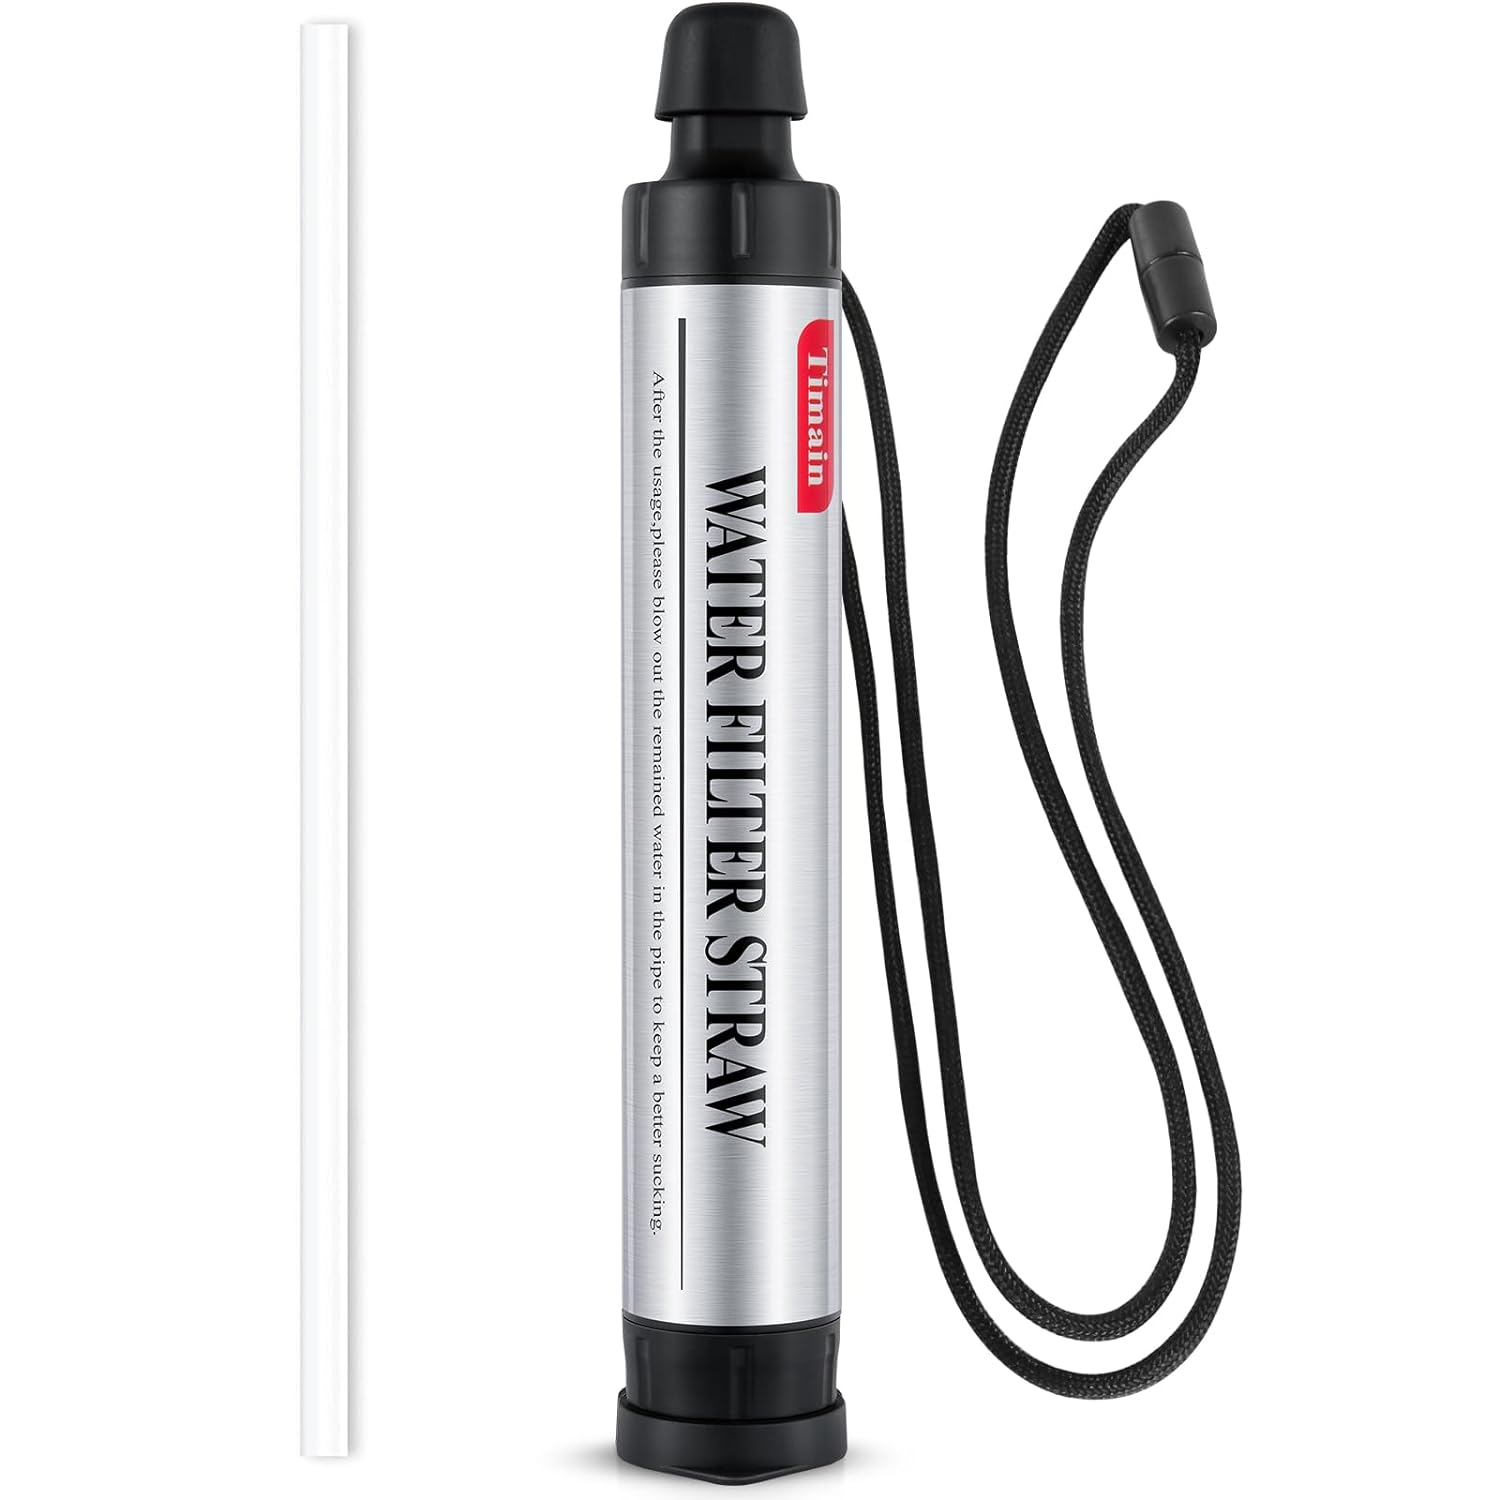 Top Water Filter Straws for Clean Drinking Water on the Go